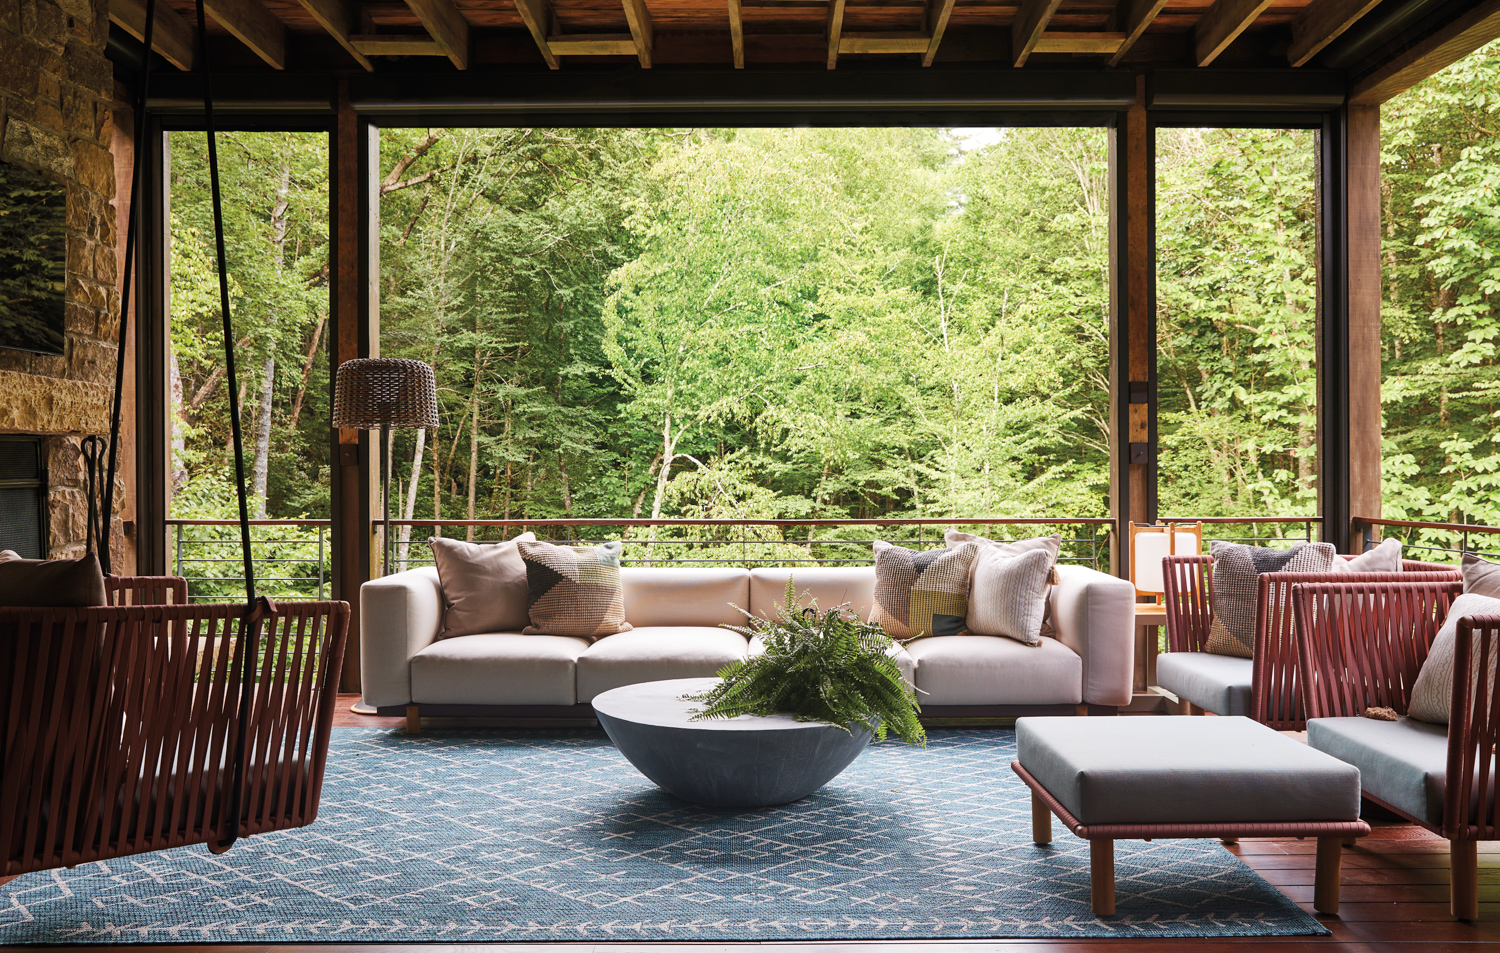 A rustic porch furnished with...